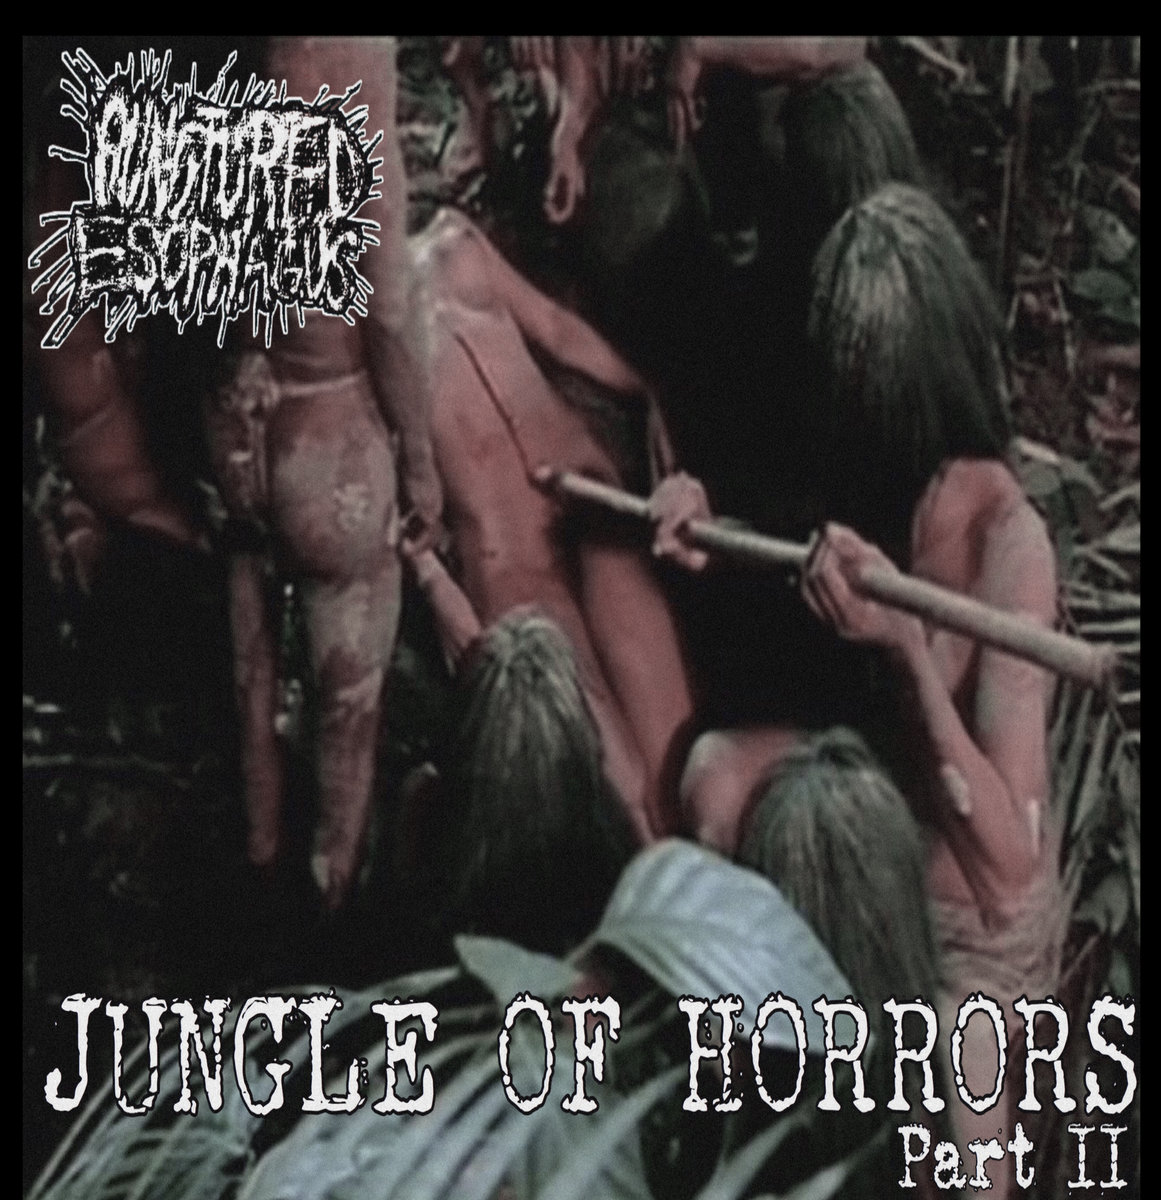 PUNCTURED ESOPHAGUS - "JUNGLE OF HORRORS PART II"